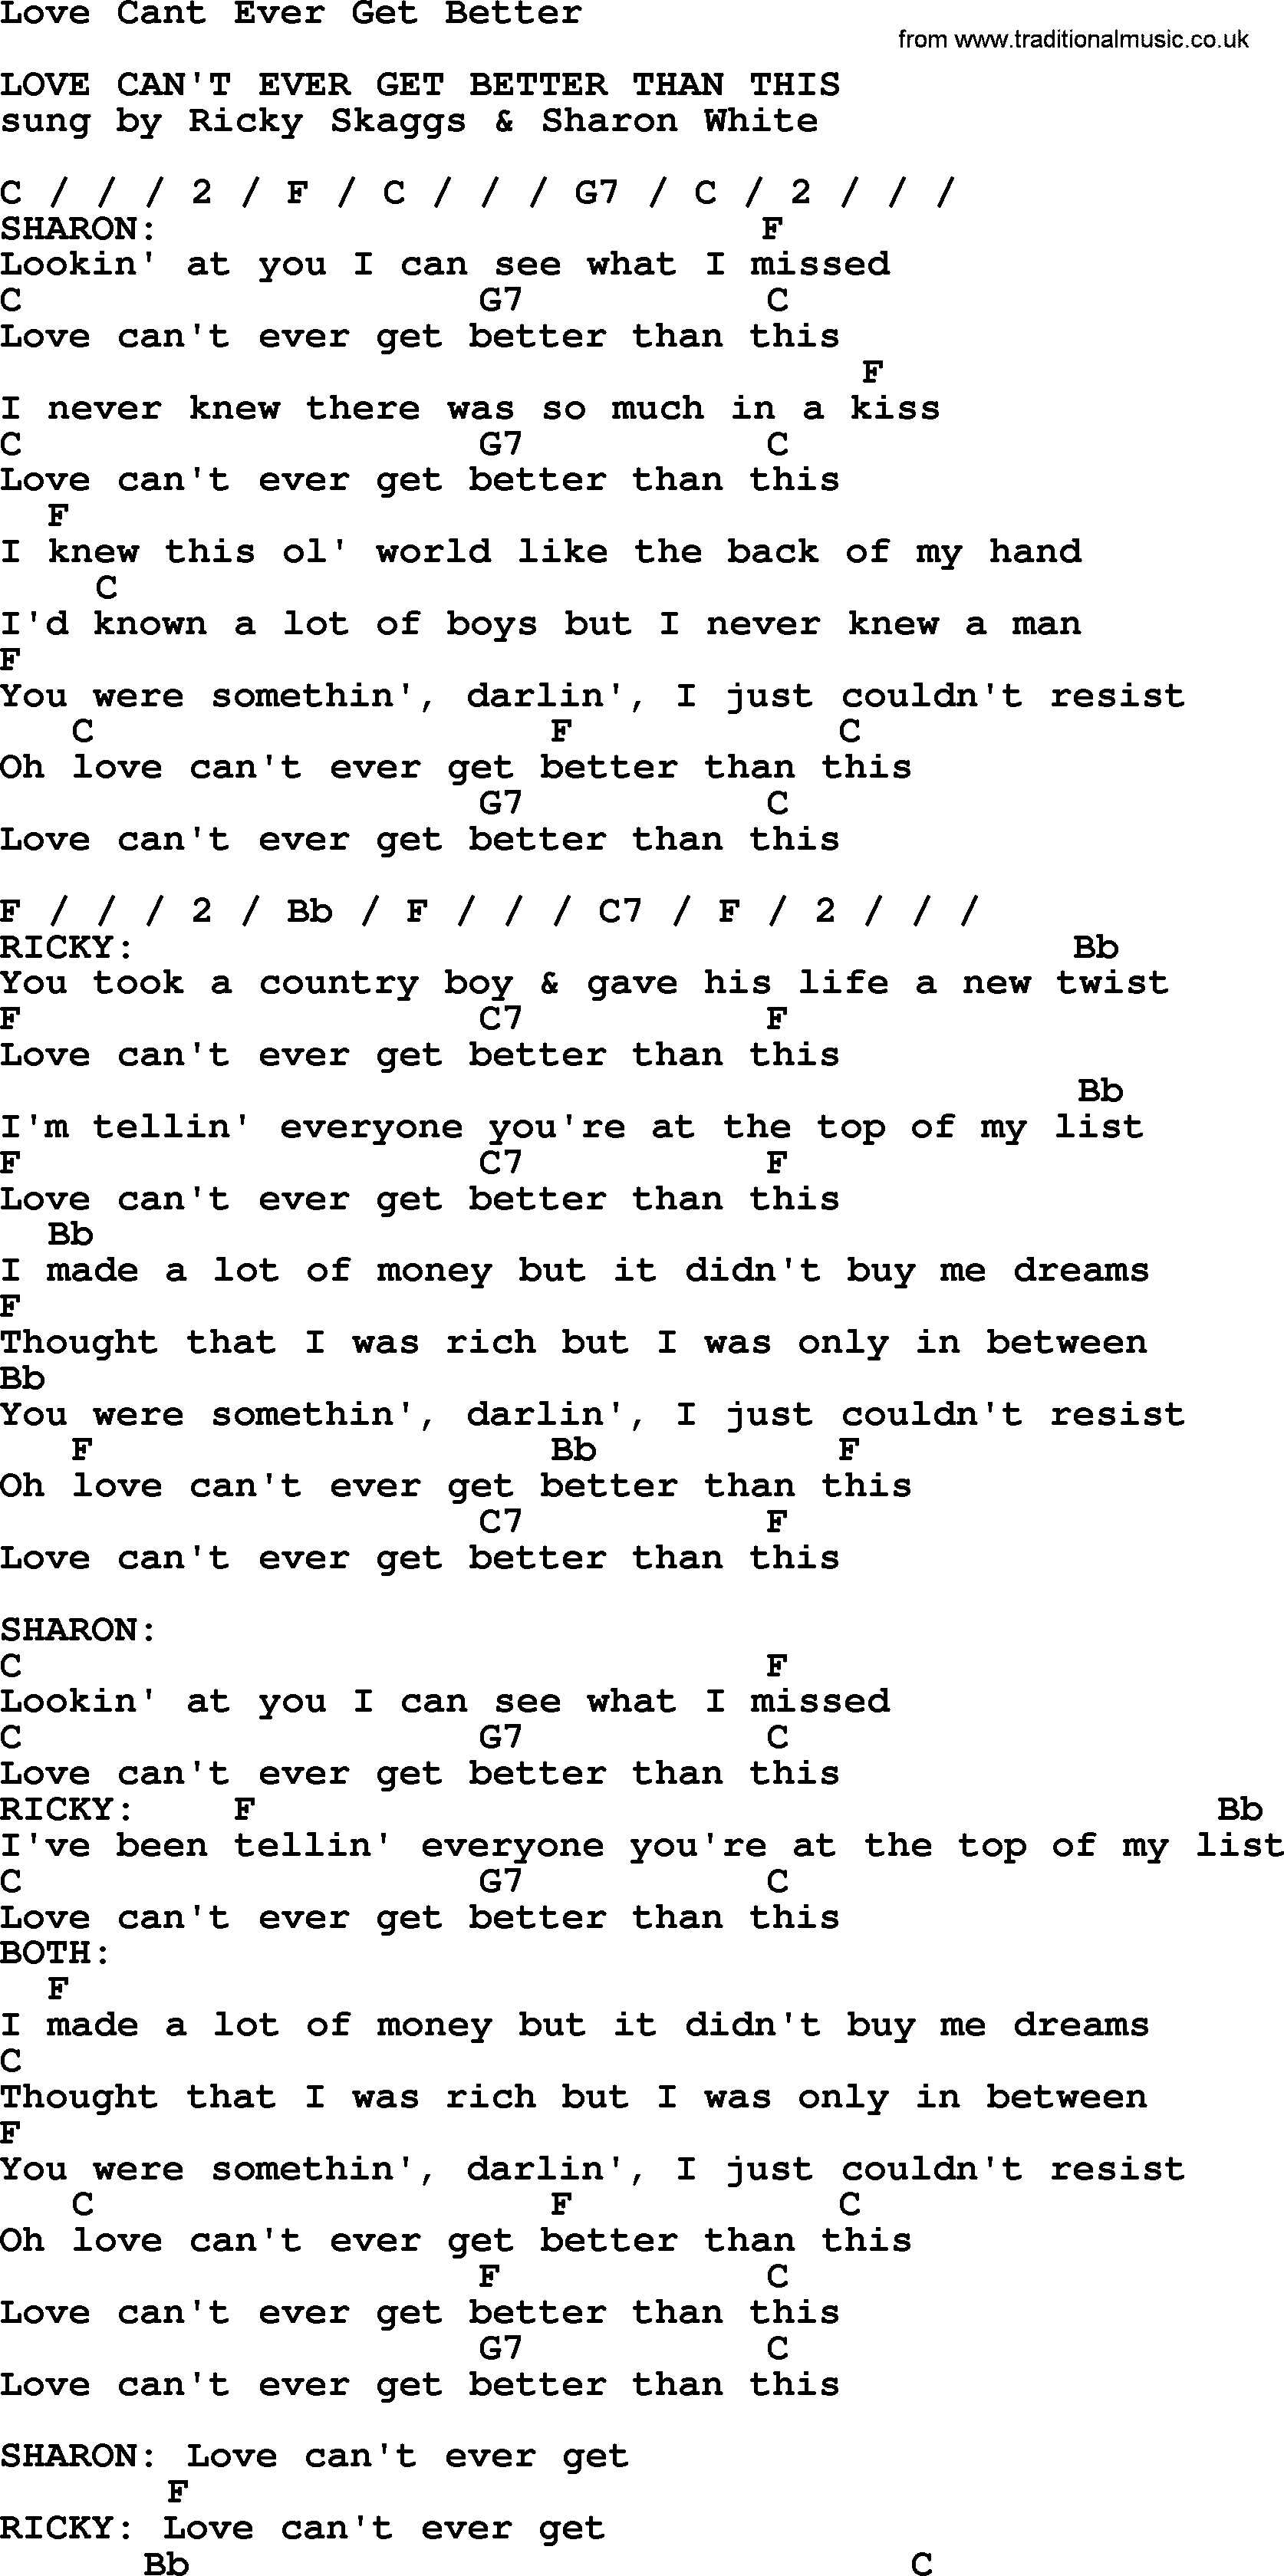 Bluegrass song: Love Cant Ever Get Better, lyrics and chords